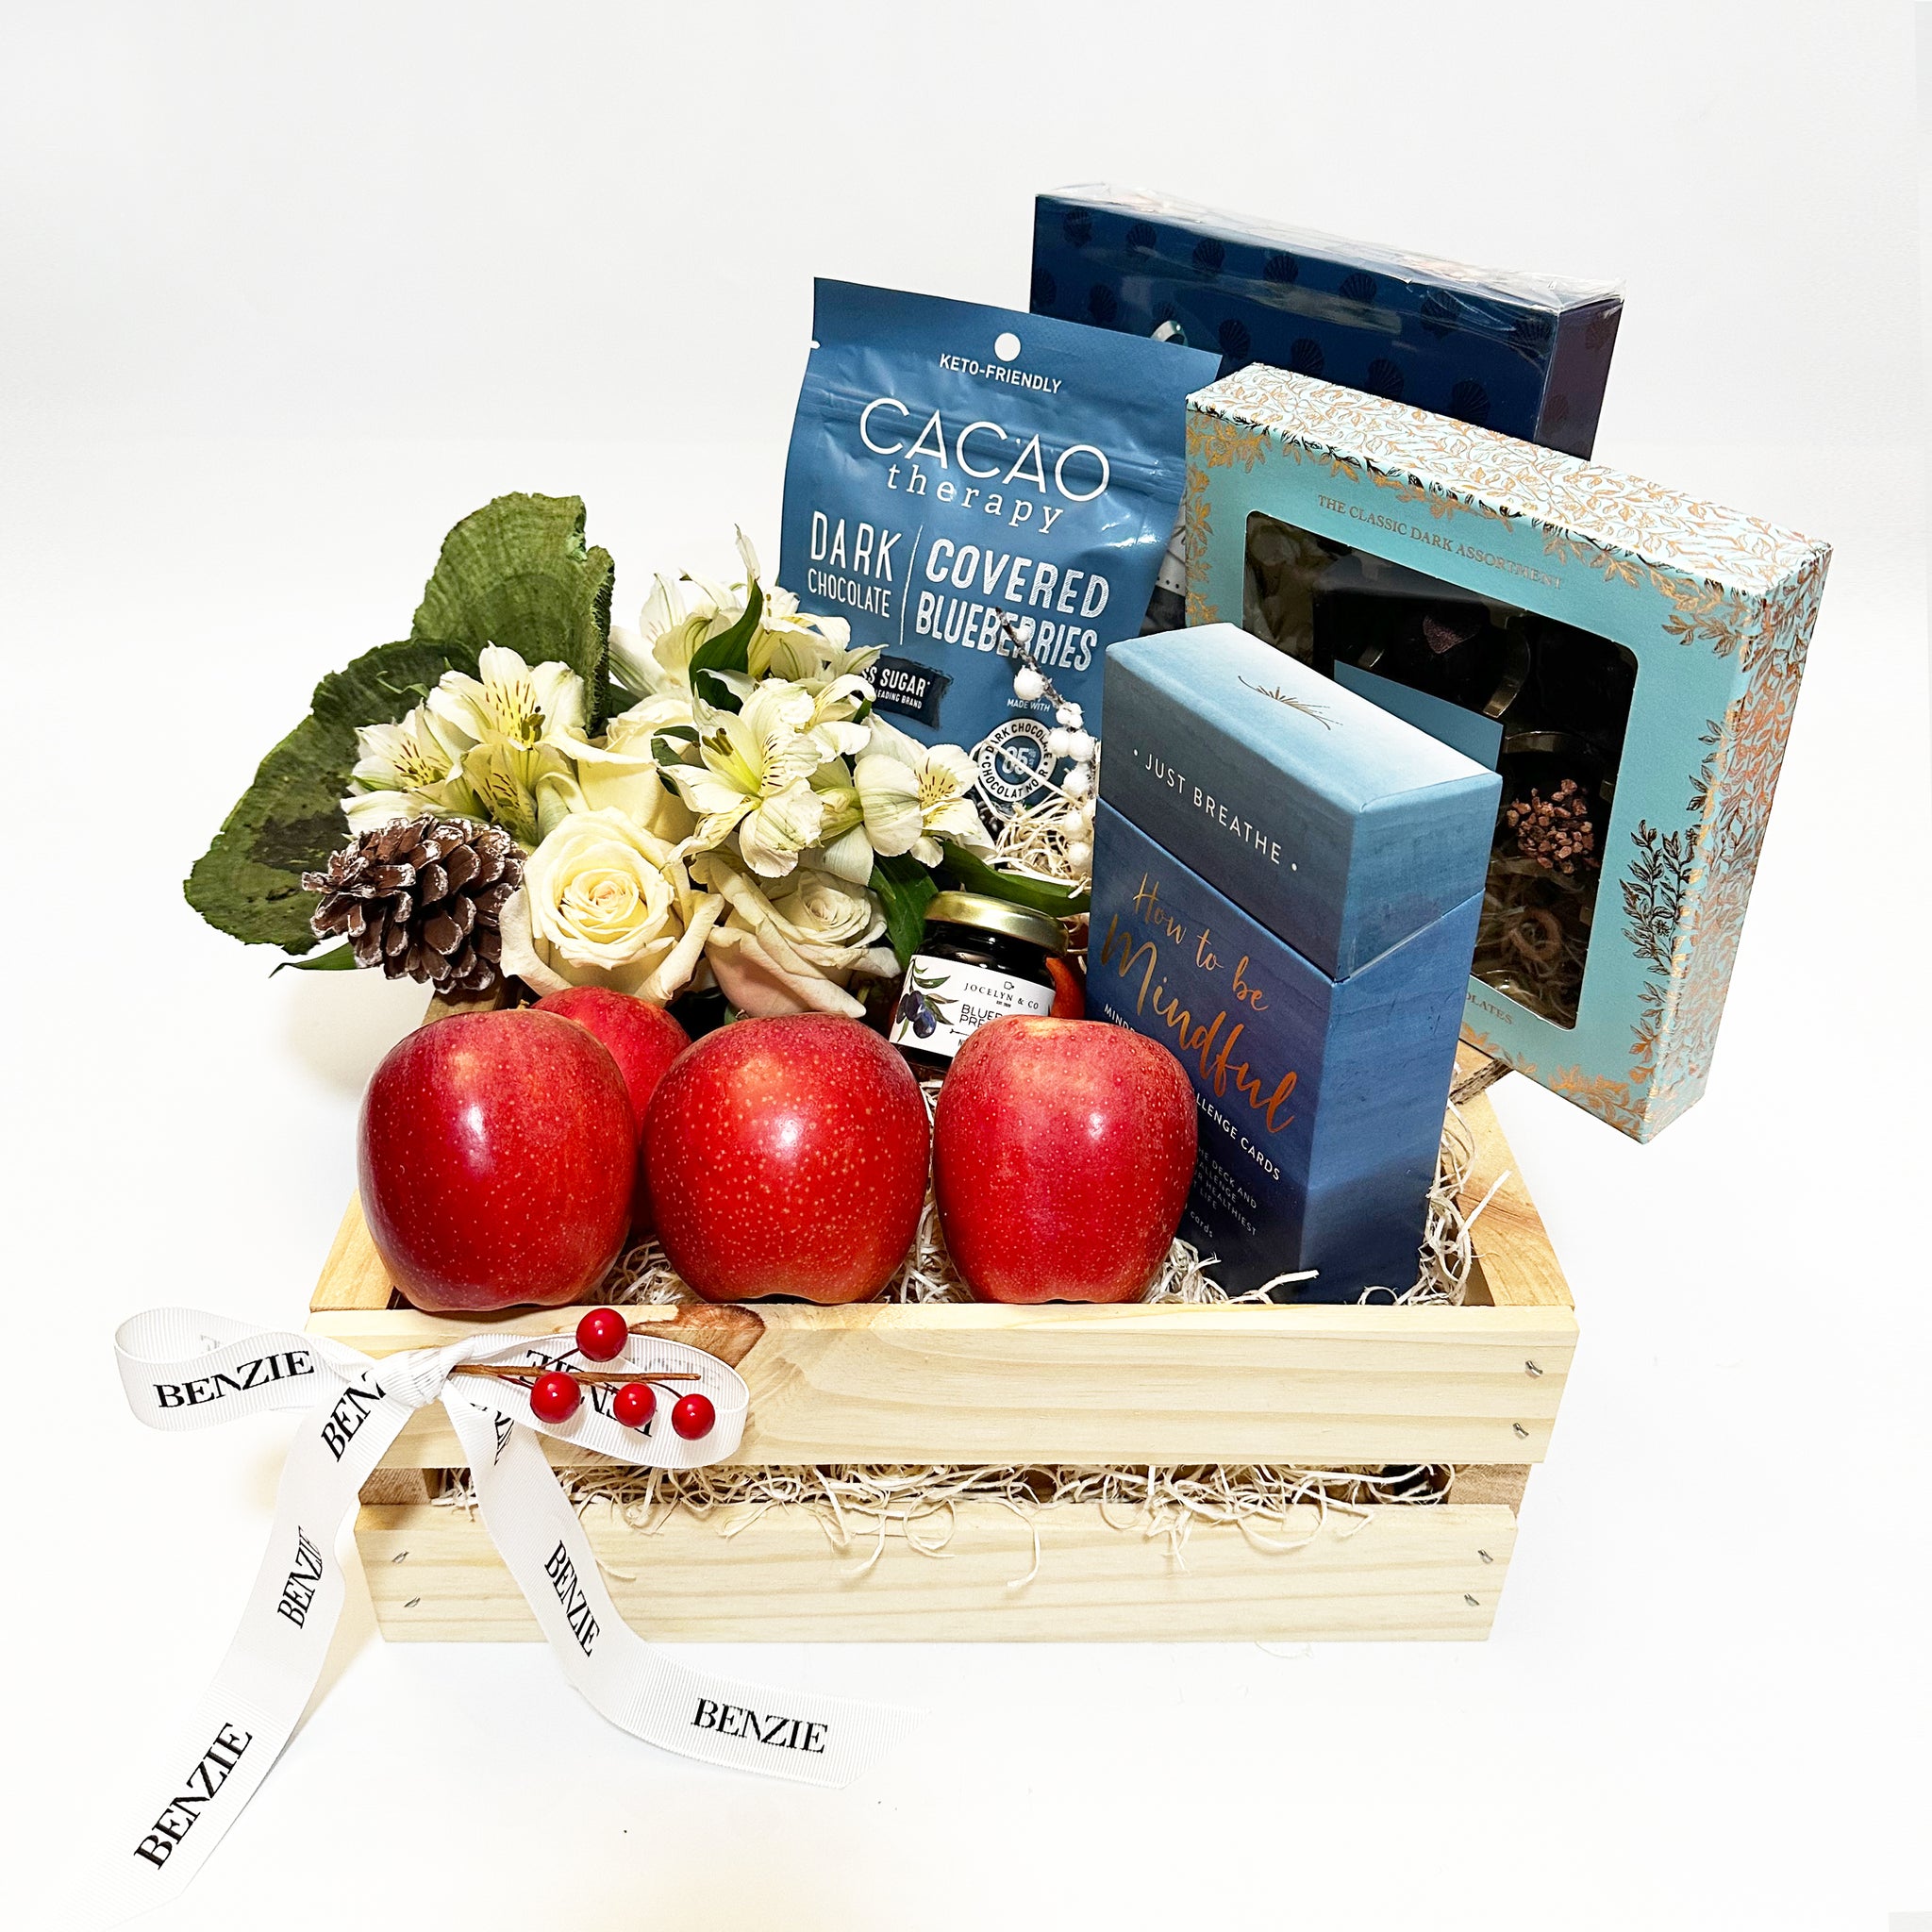 Mindful Holiday Gift Basket - Benzie Gifts